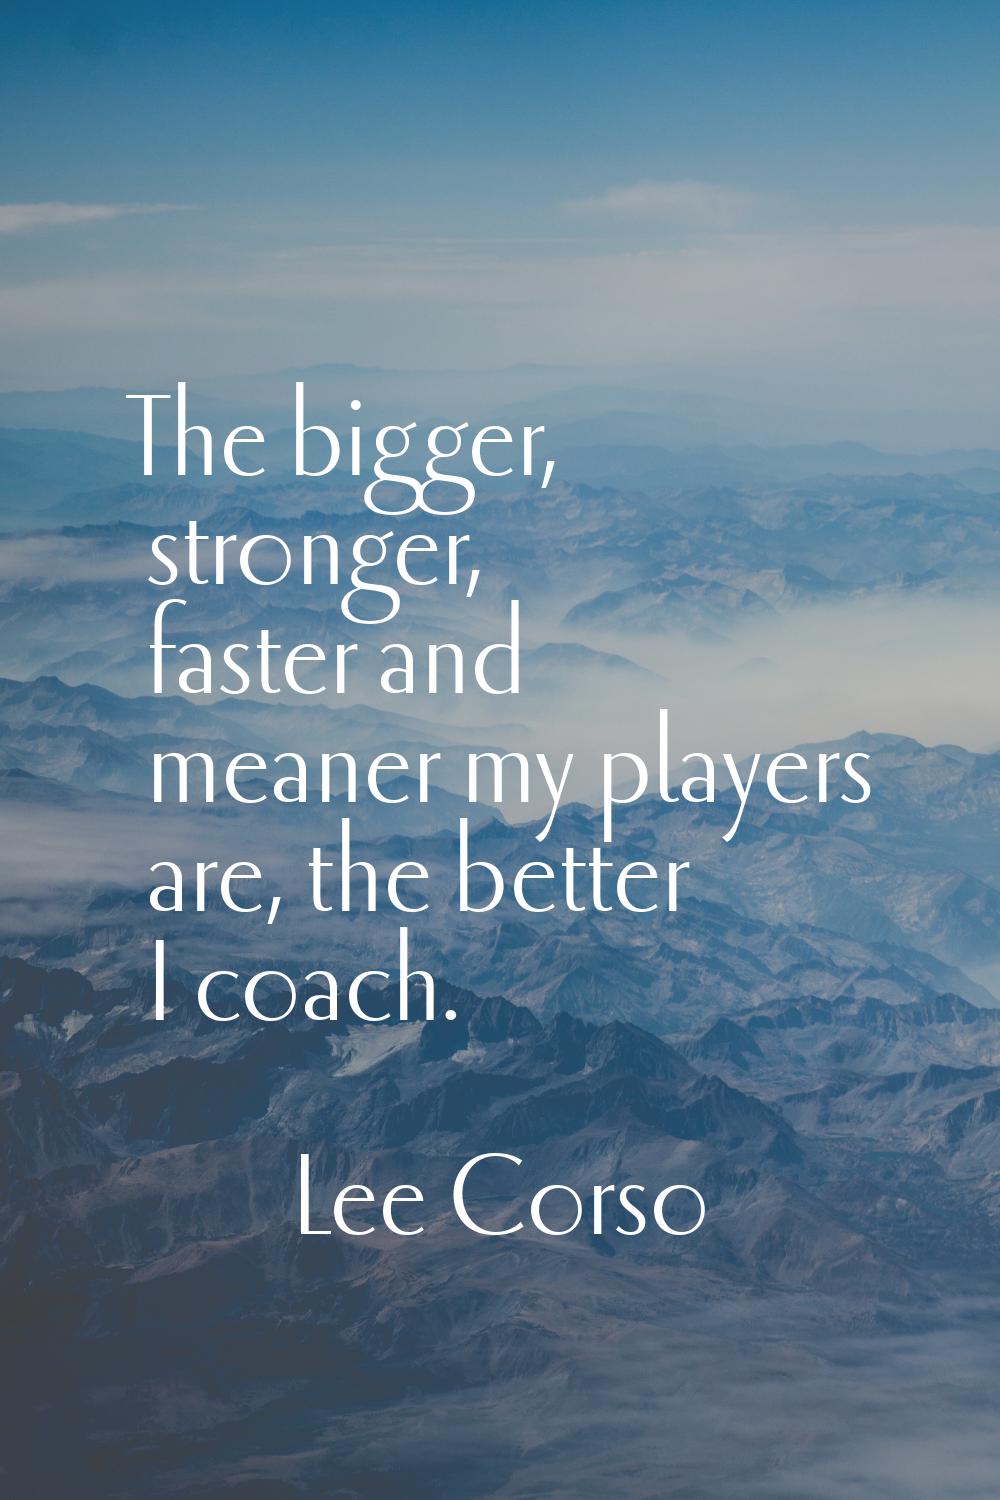 The bigger, stronger, faster and meaner my players are, the better I coach.